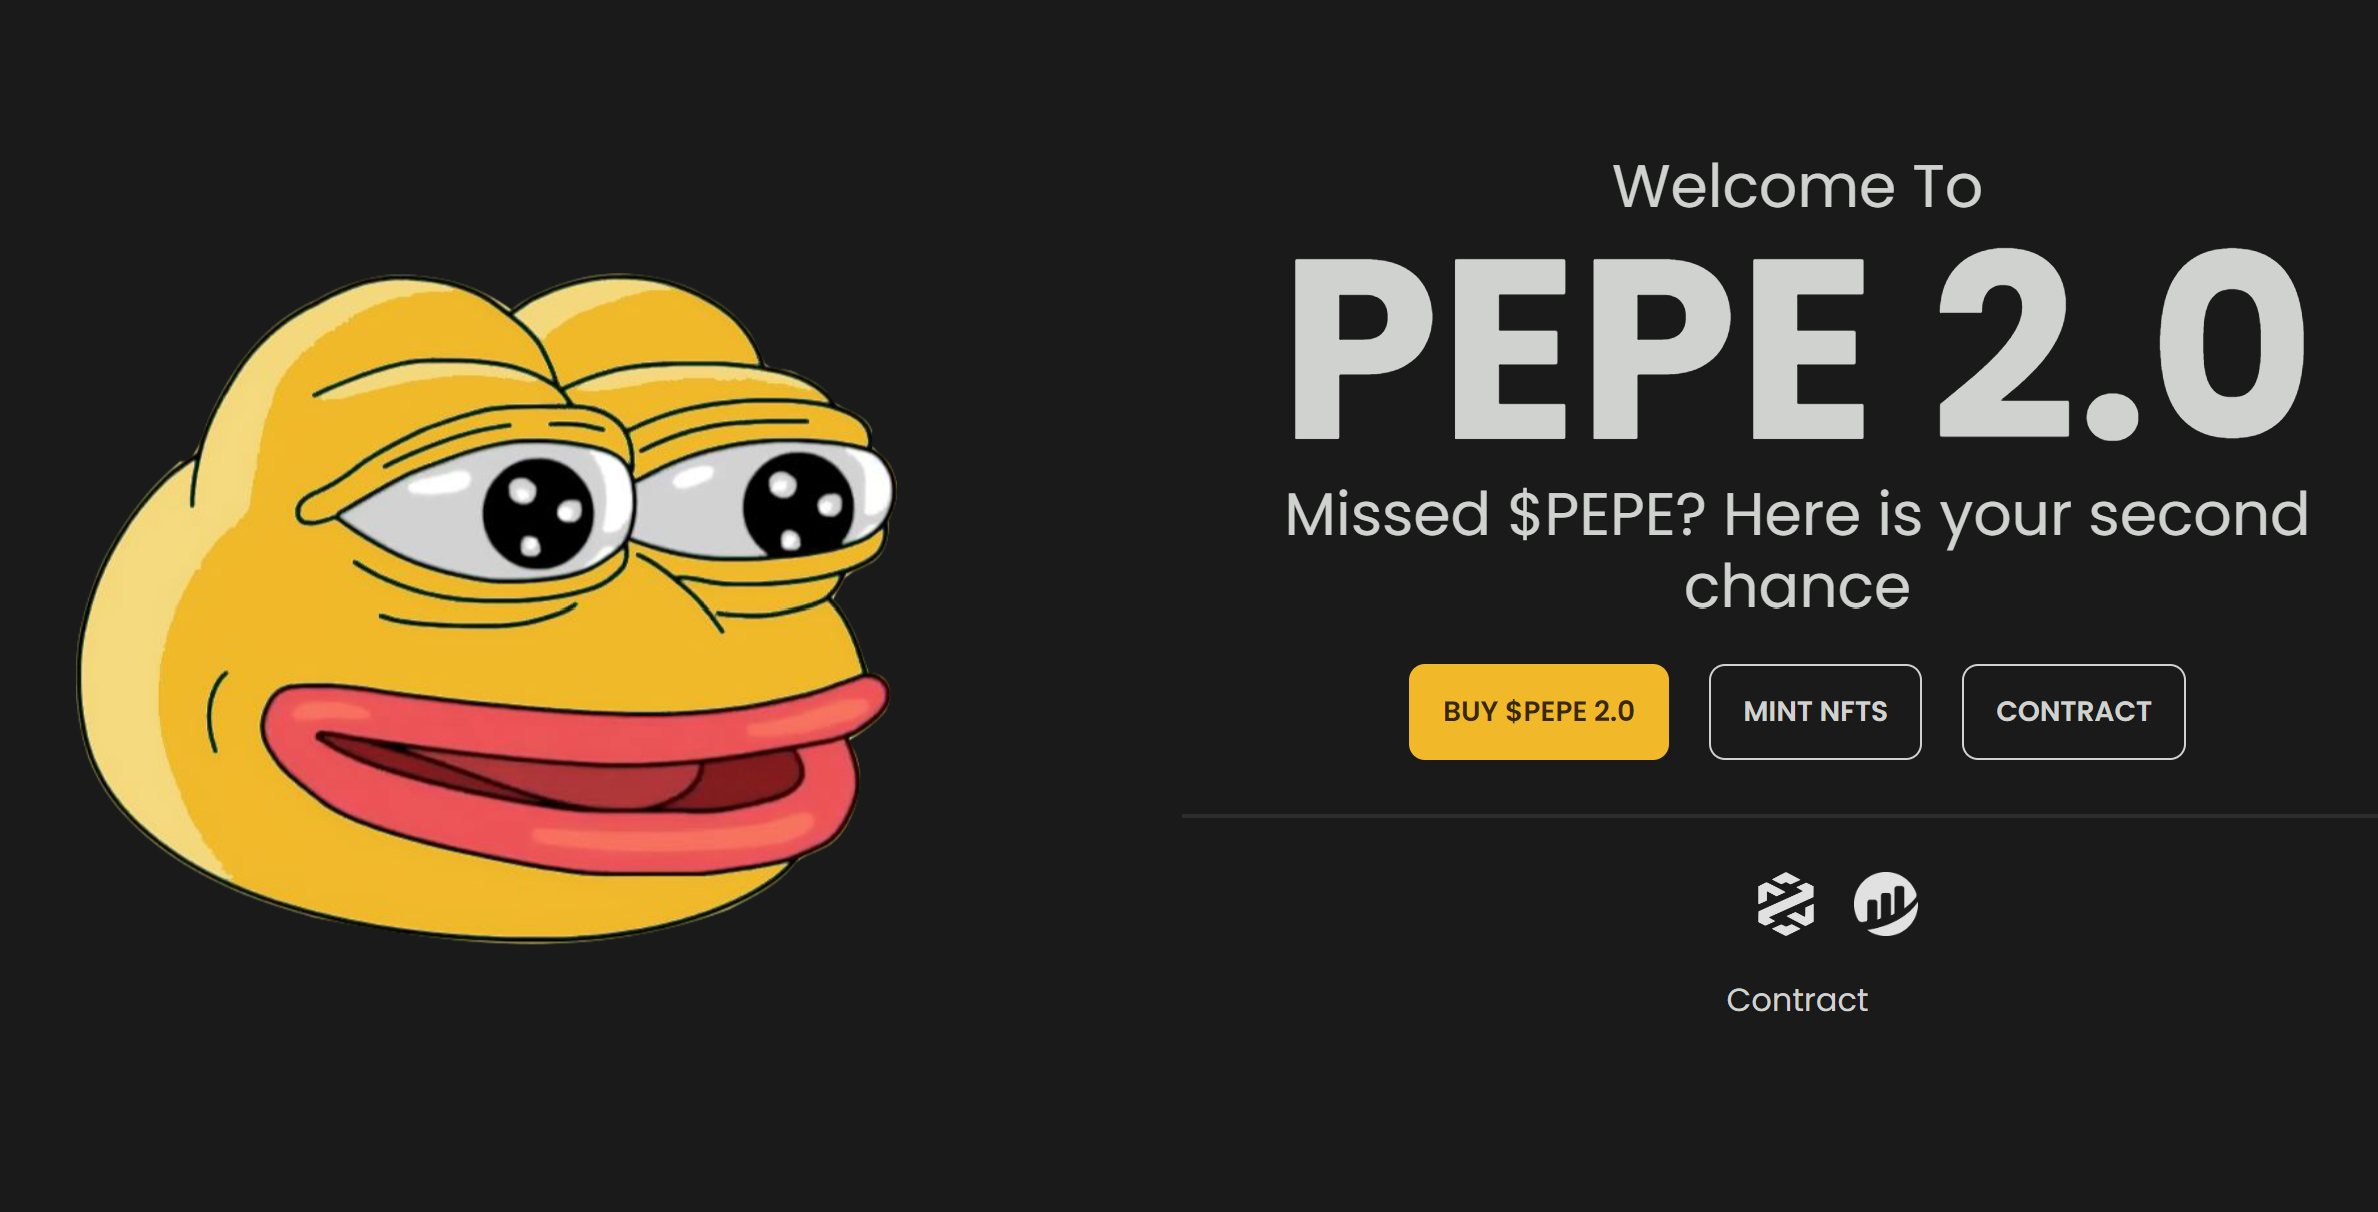 How to Buy Pepe 2.0 Coin - Complete Guide